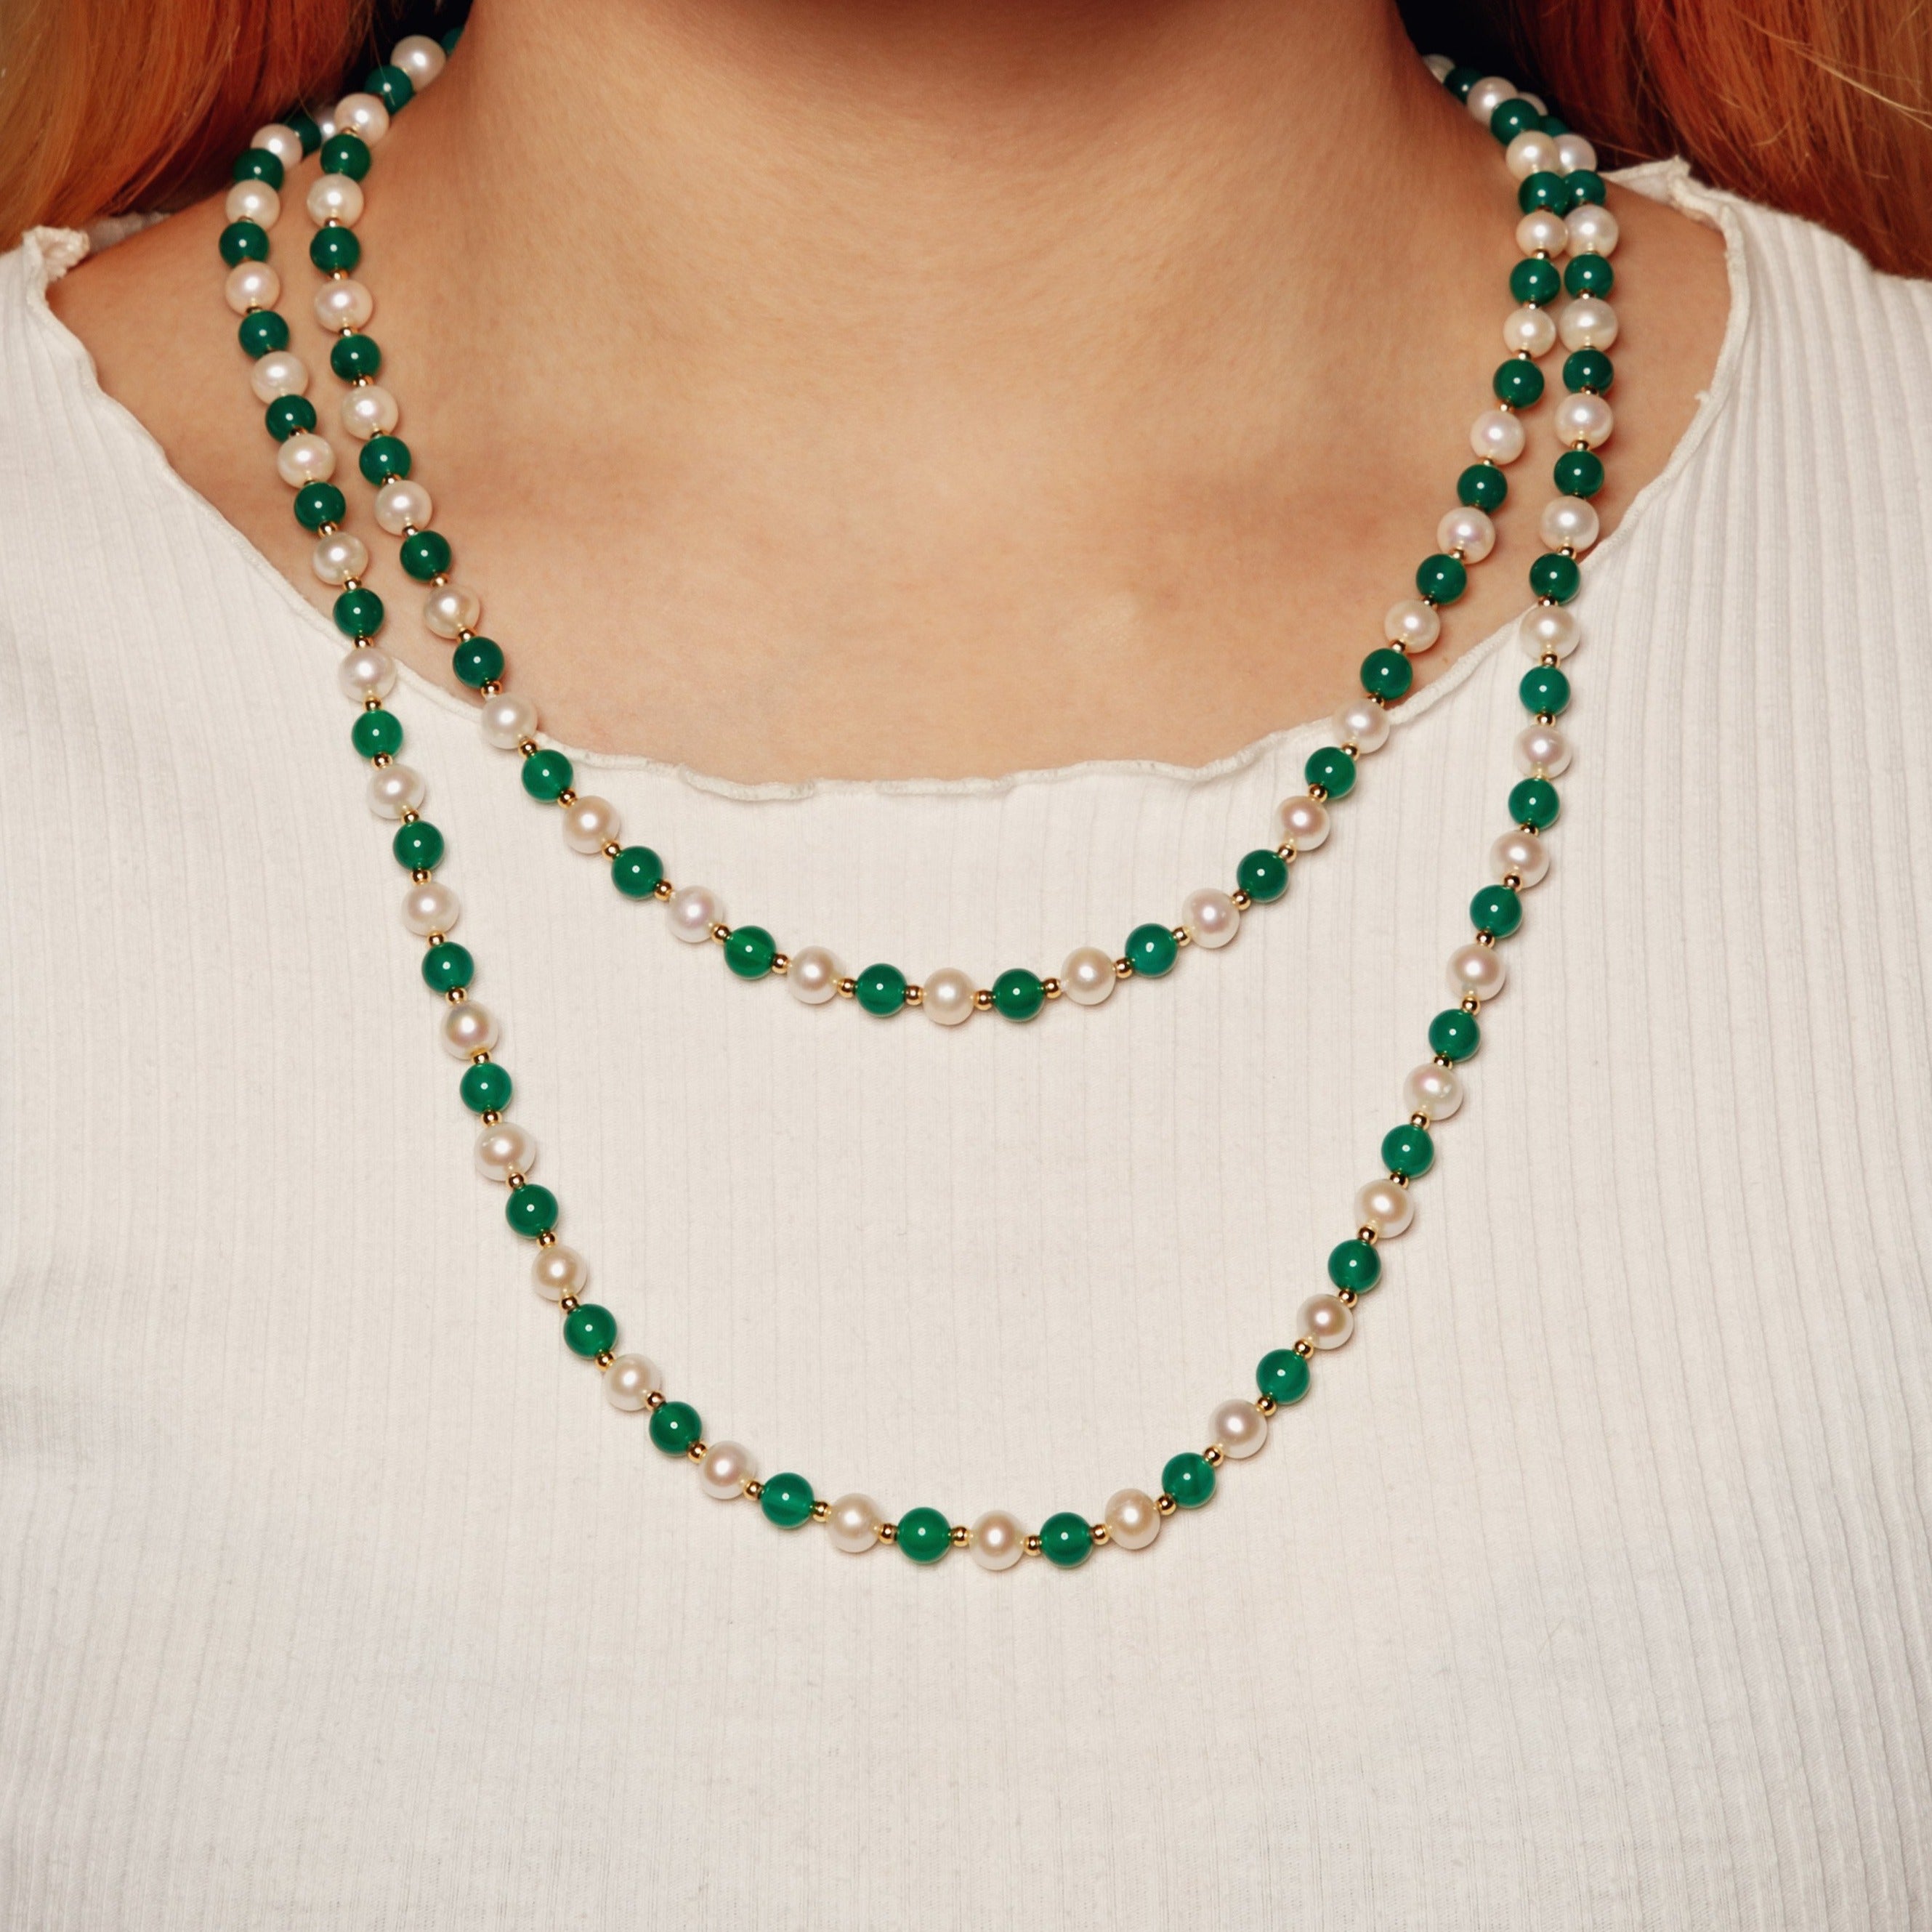 【Chalcedony】7MM S925 Pearl Jade Necklace